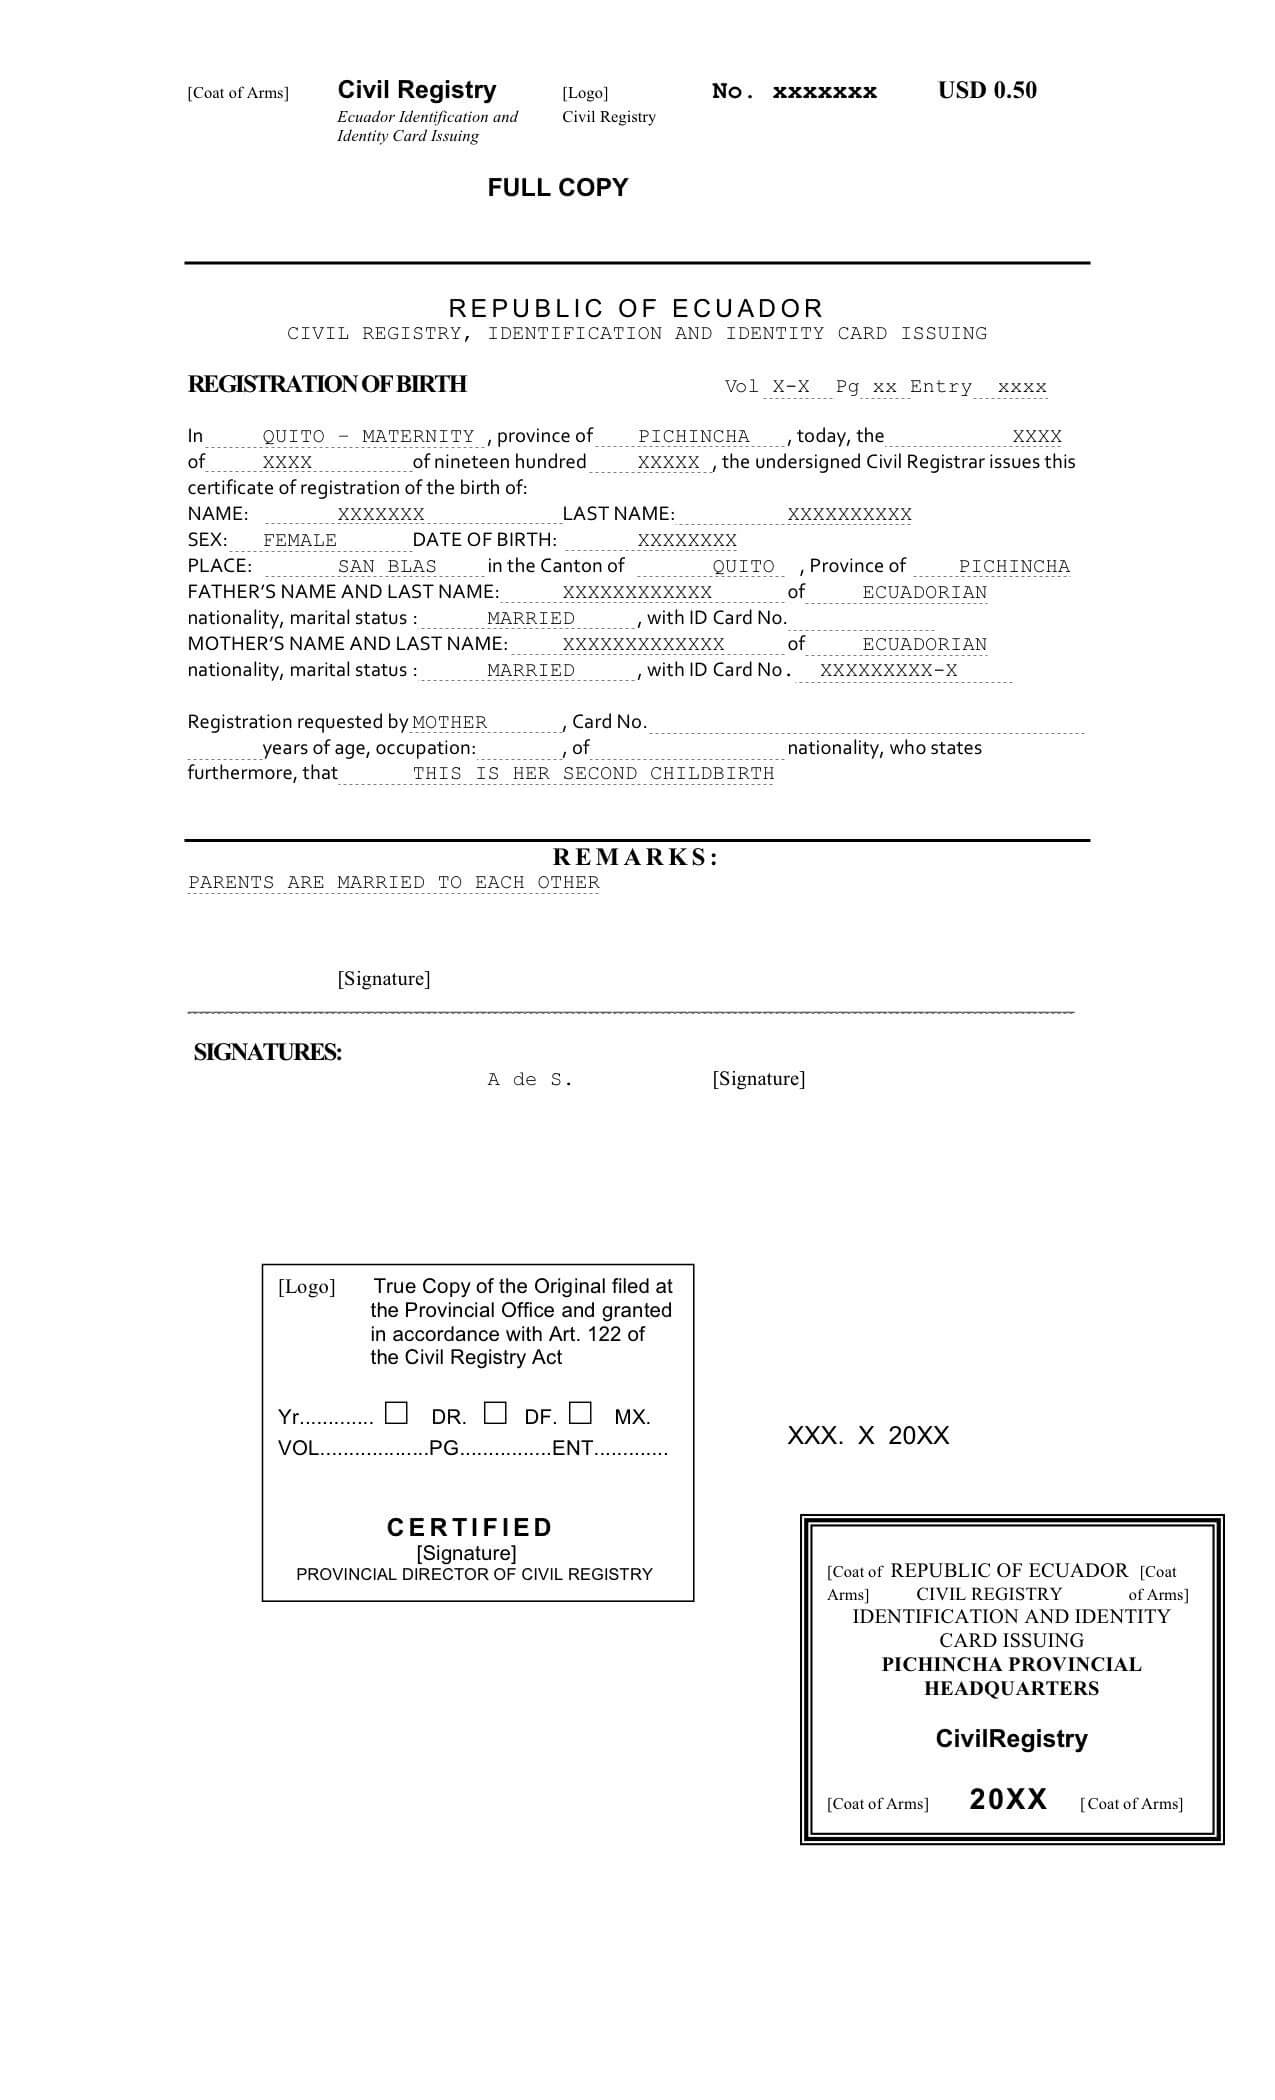 Death Certificate Translation From Spanish To English Sample With Regard To Birth Certificate Translation Template English To Spanish